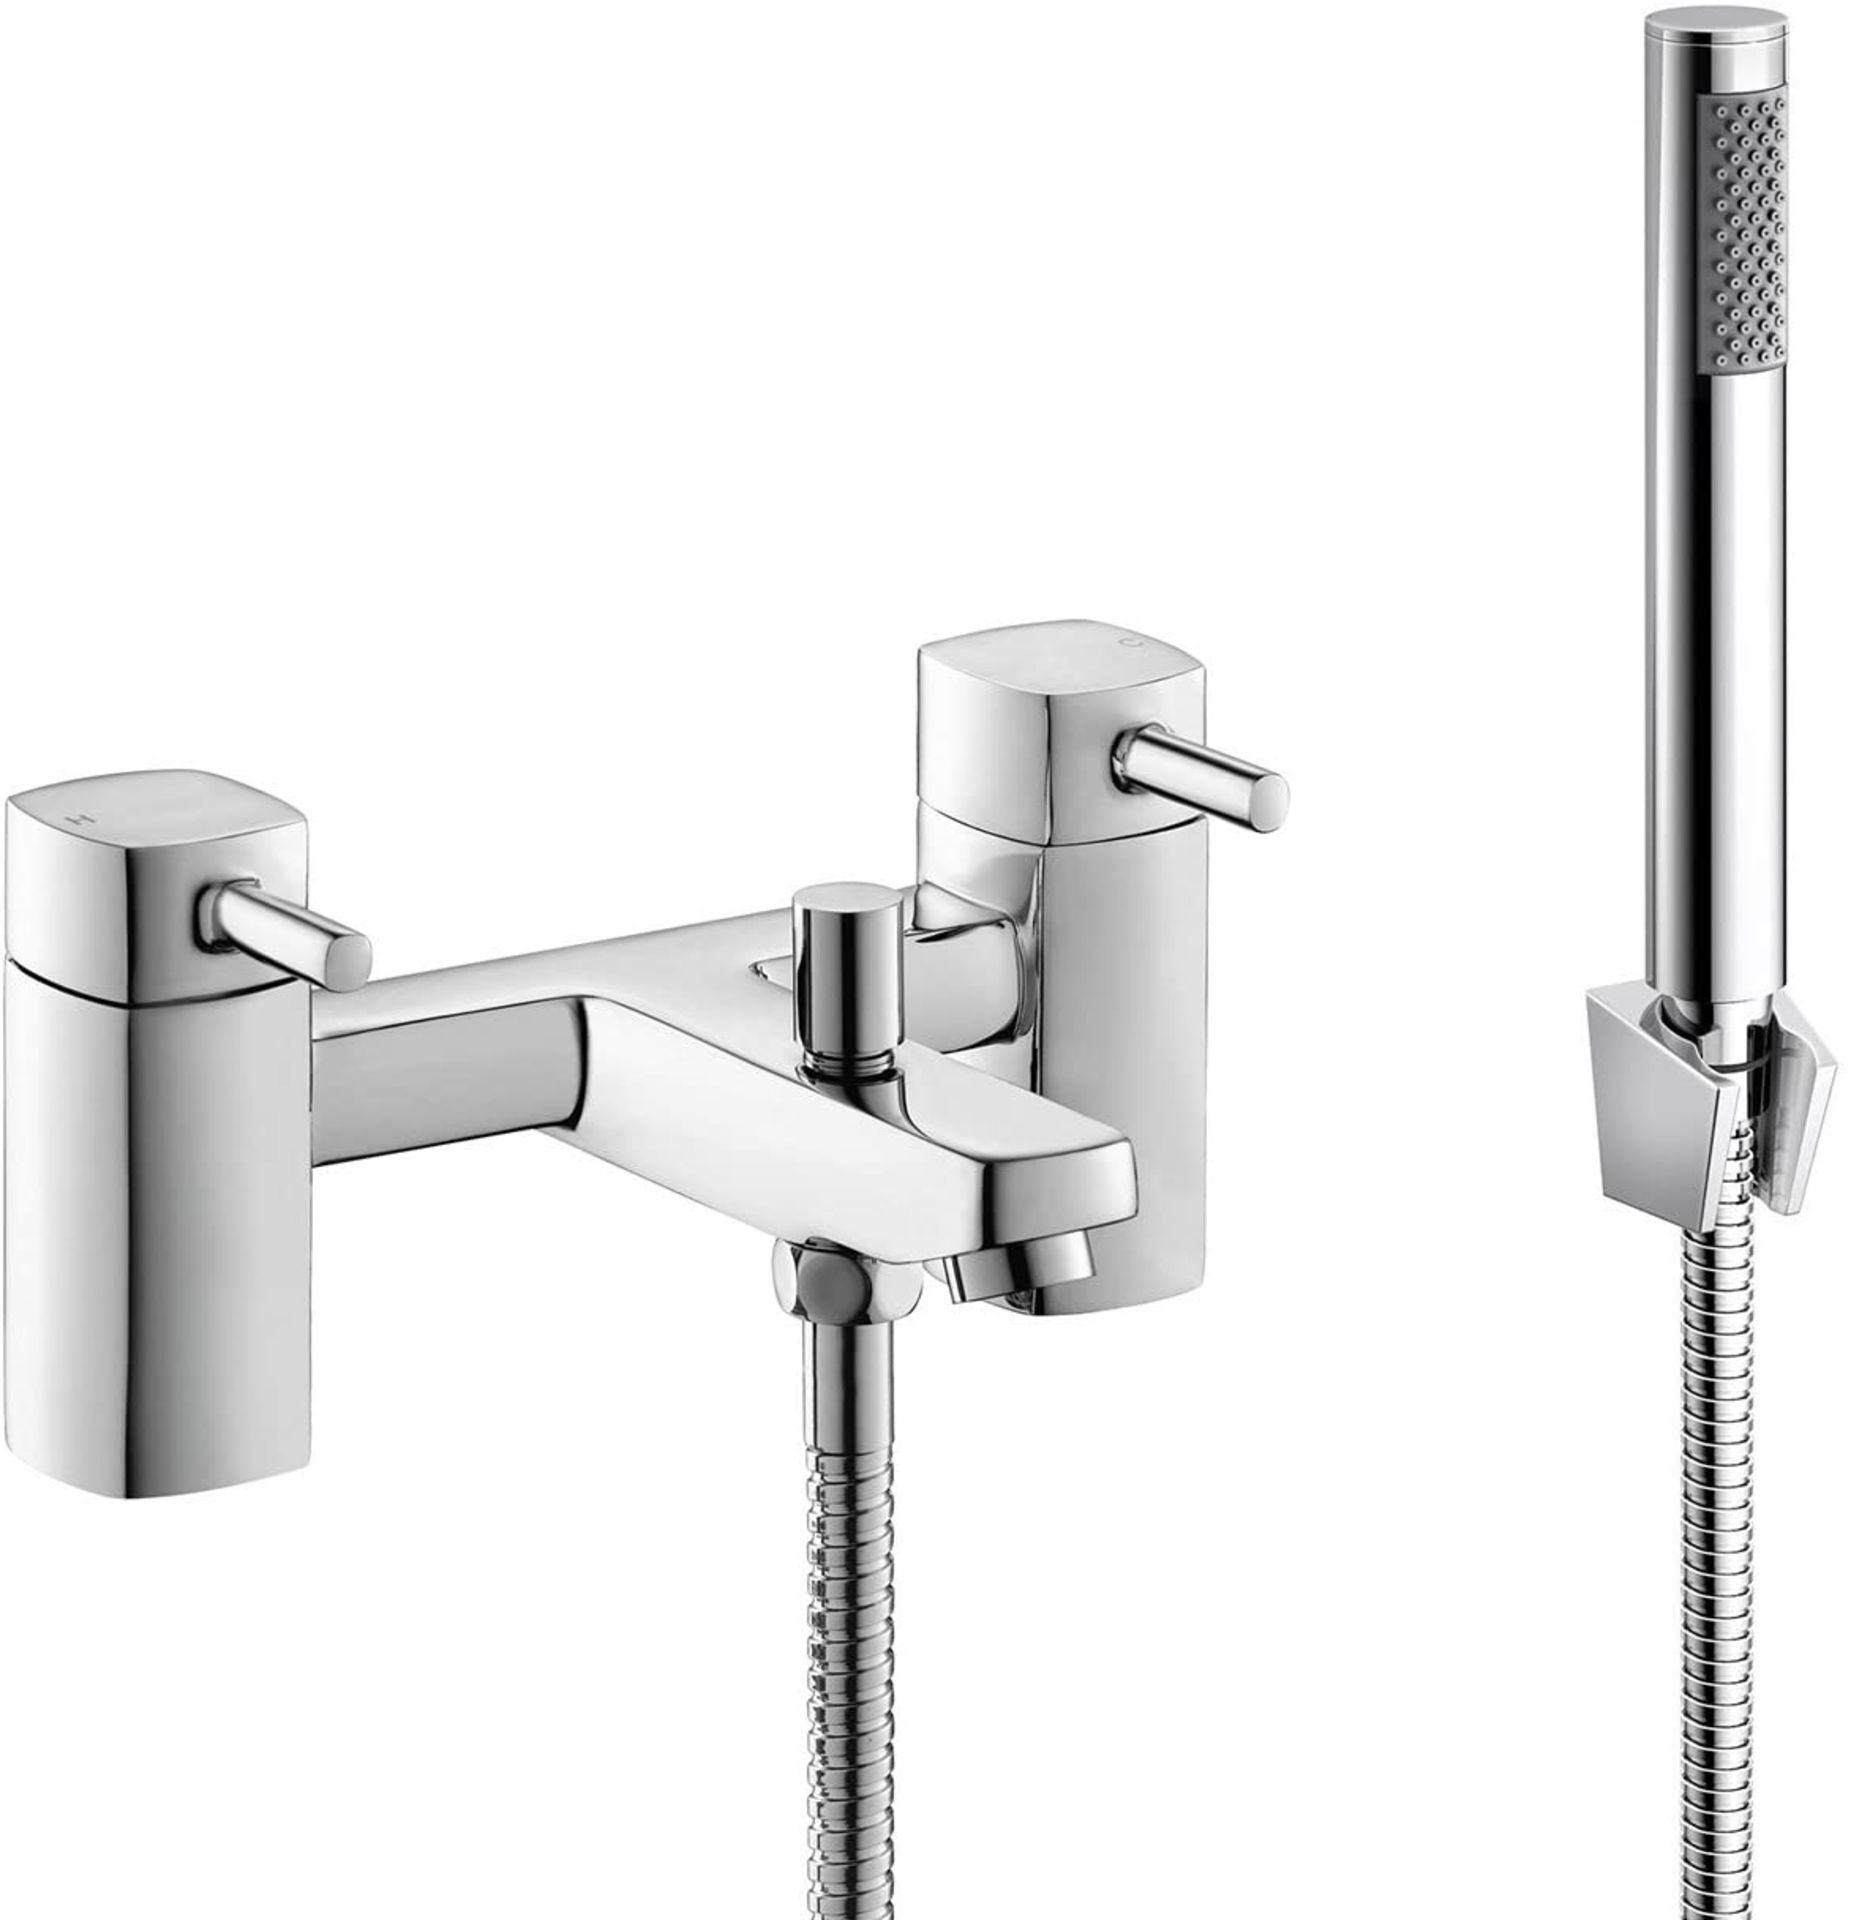 (MG1003) Square Bath Filler Mixer Tap with Modern Bathroom Shower Head . Chrome plated solid b... - Image 3 of 3